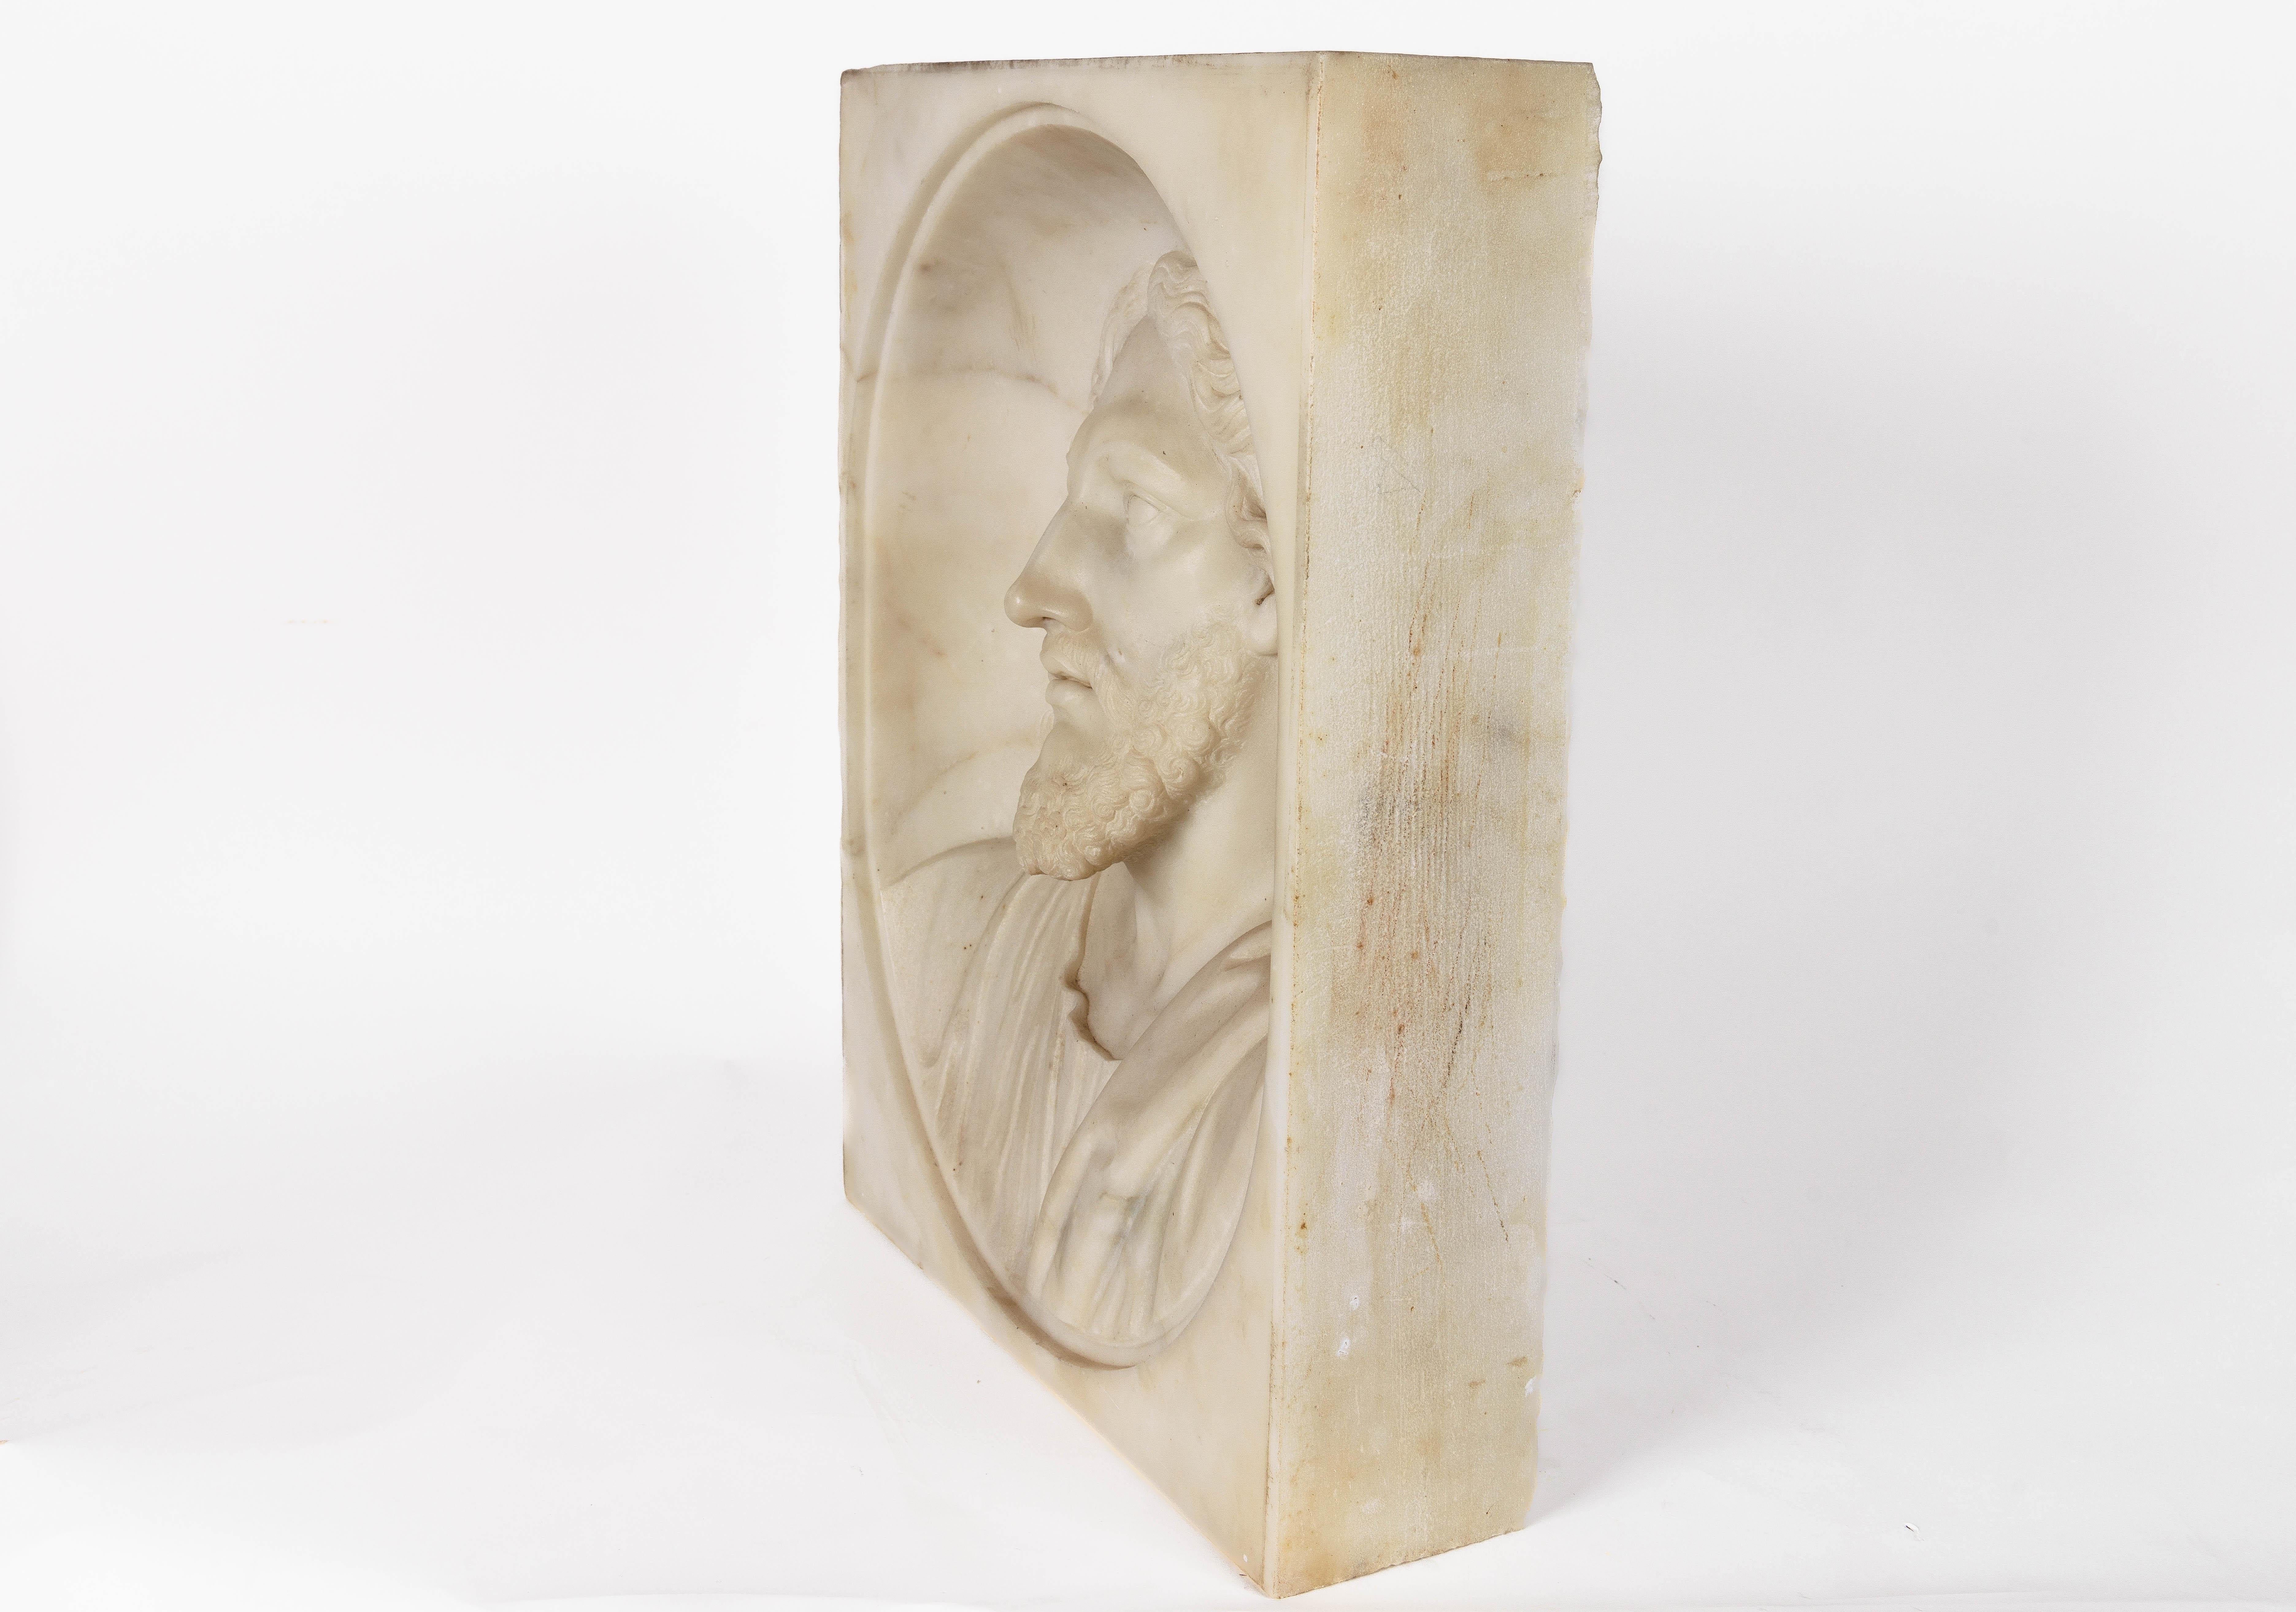 Rare and Important Italian White Marble Bust Sculpture of Jesus Christ, C. 1850 For Sale 8